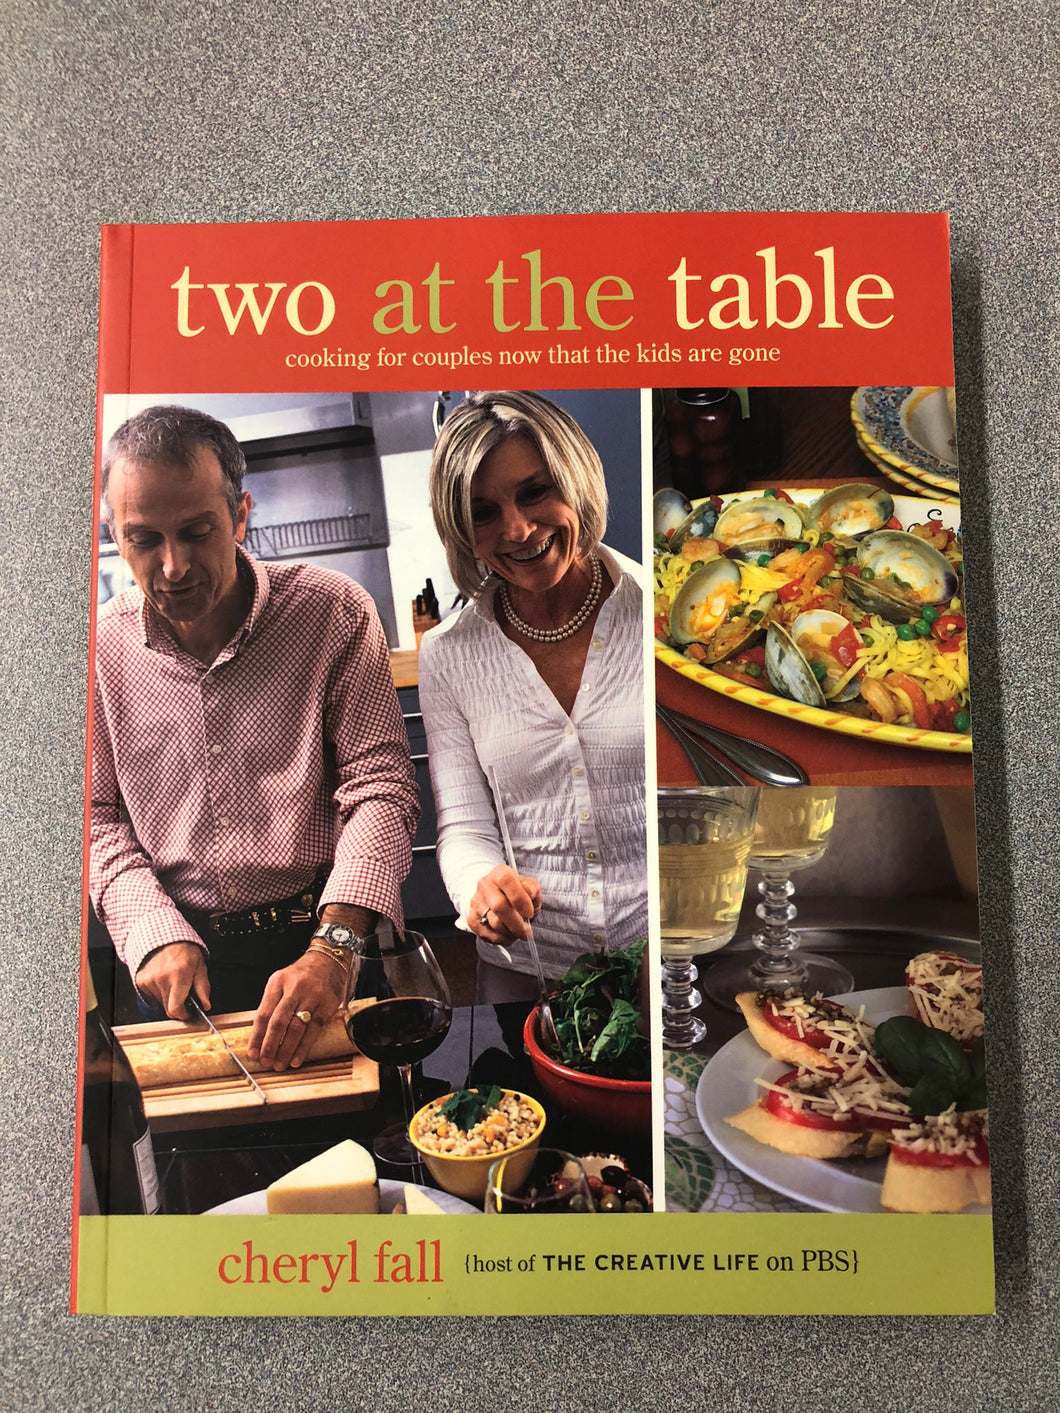 Two at the Table: Cooking for Couples Now that the Kids are Gone, Fall, Cheryl [2007] CO 7/22